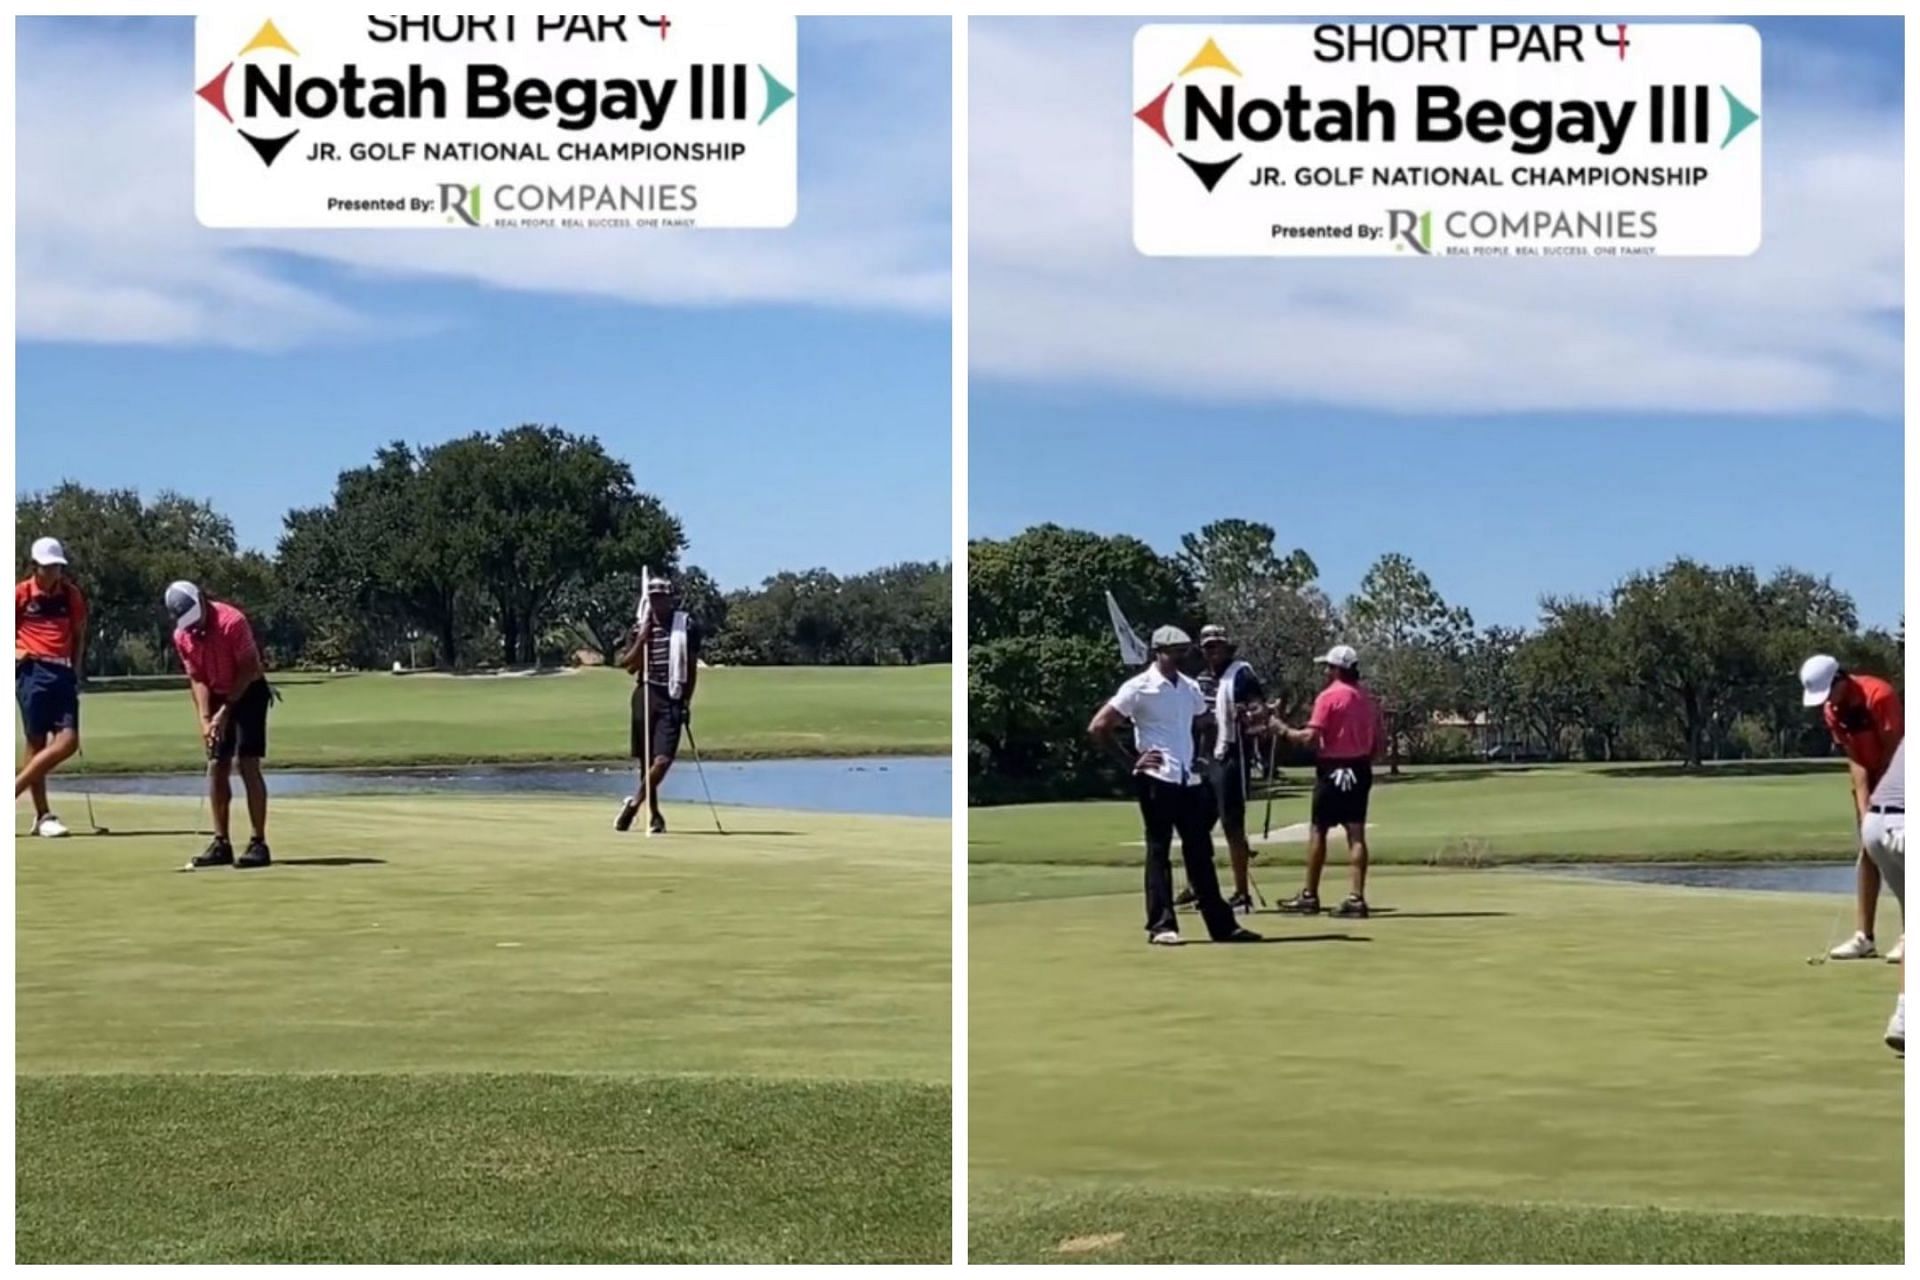 Tiger Woods was caddying for Charlie Woods at the Notah Begay III regional(Image via Twitter.com/NUCLR Golf)